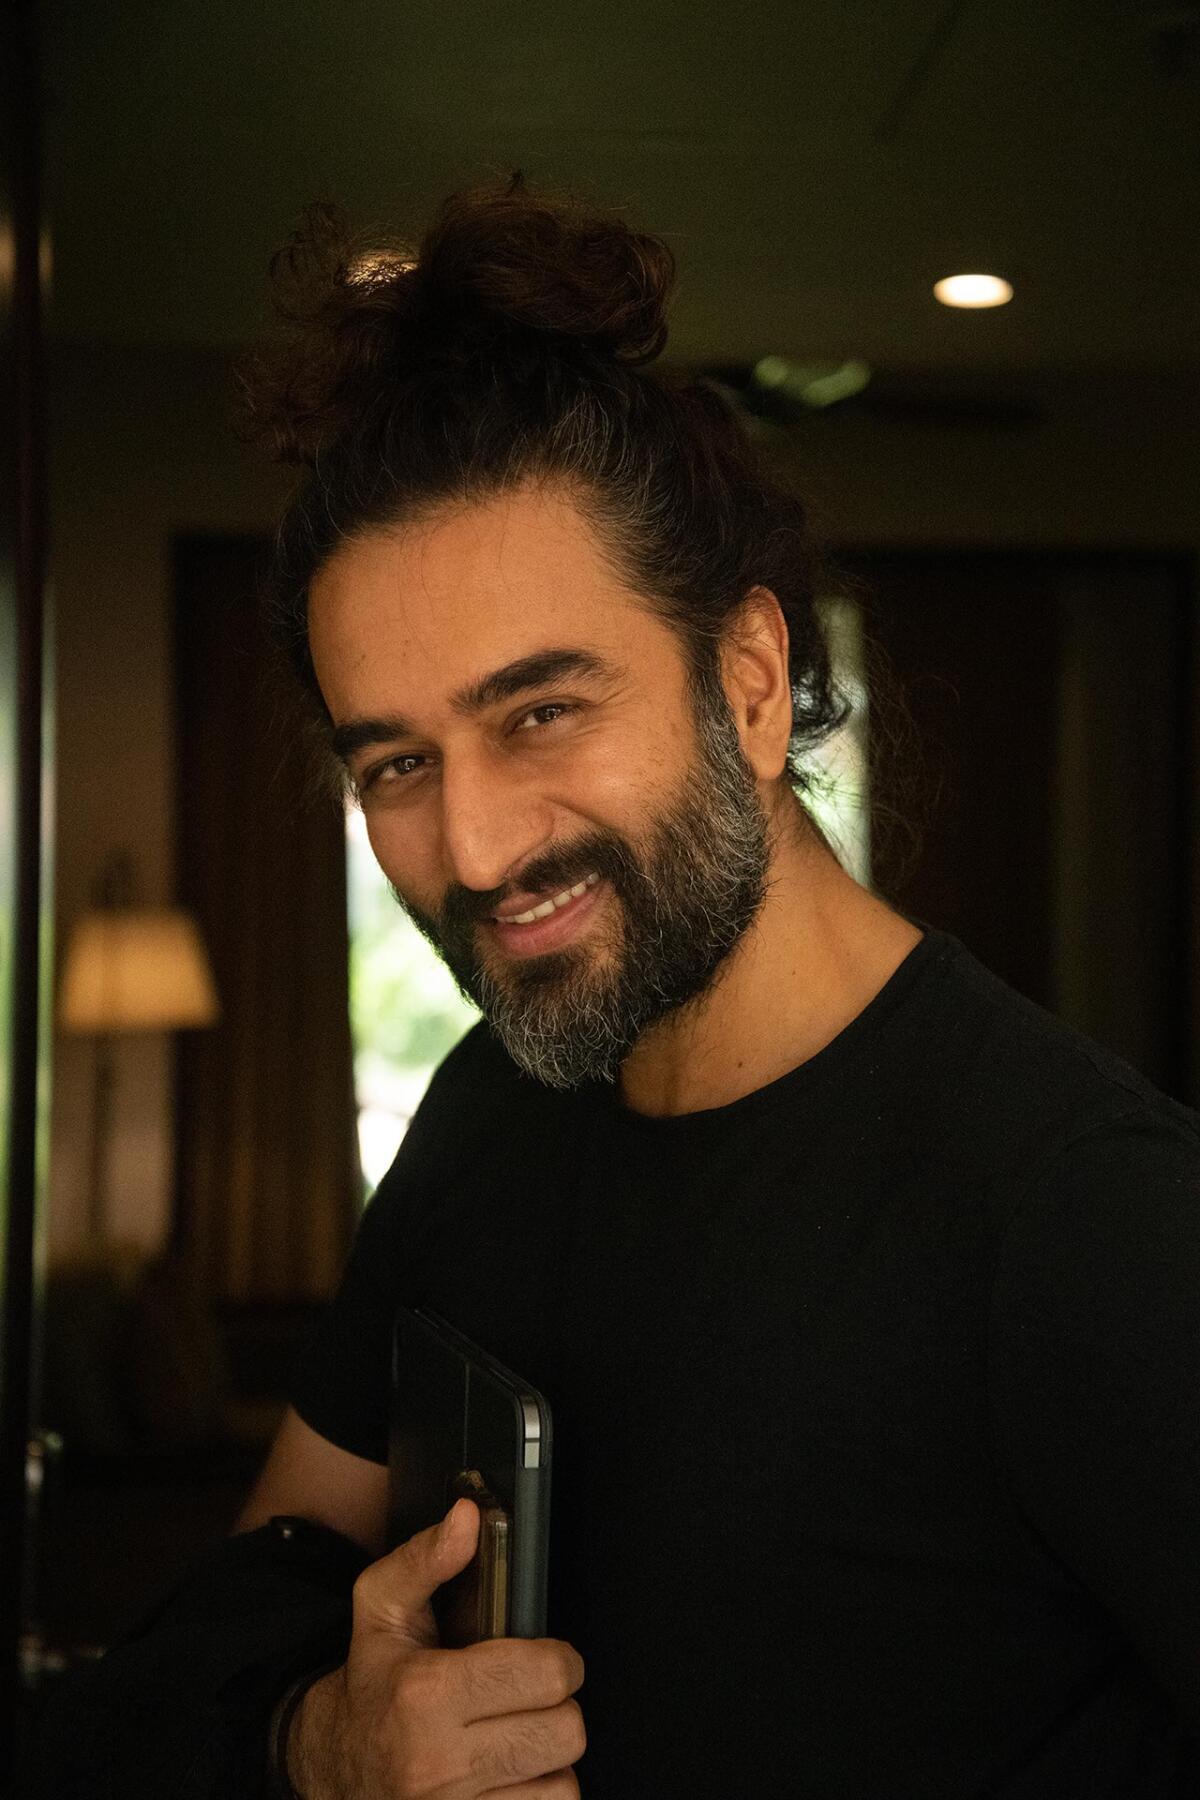 Sheykhar Ravjiani is one of the composers of "Come Fall in Love — The DDLJ Musical."